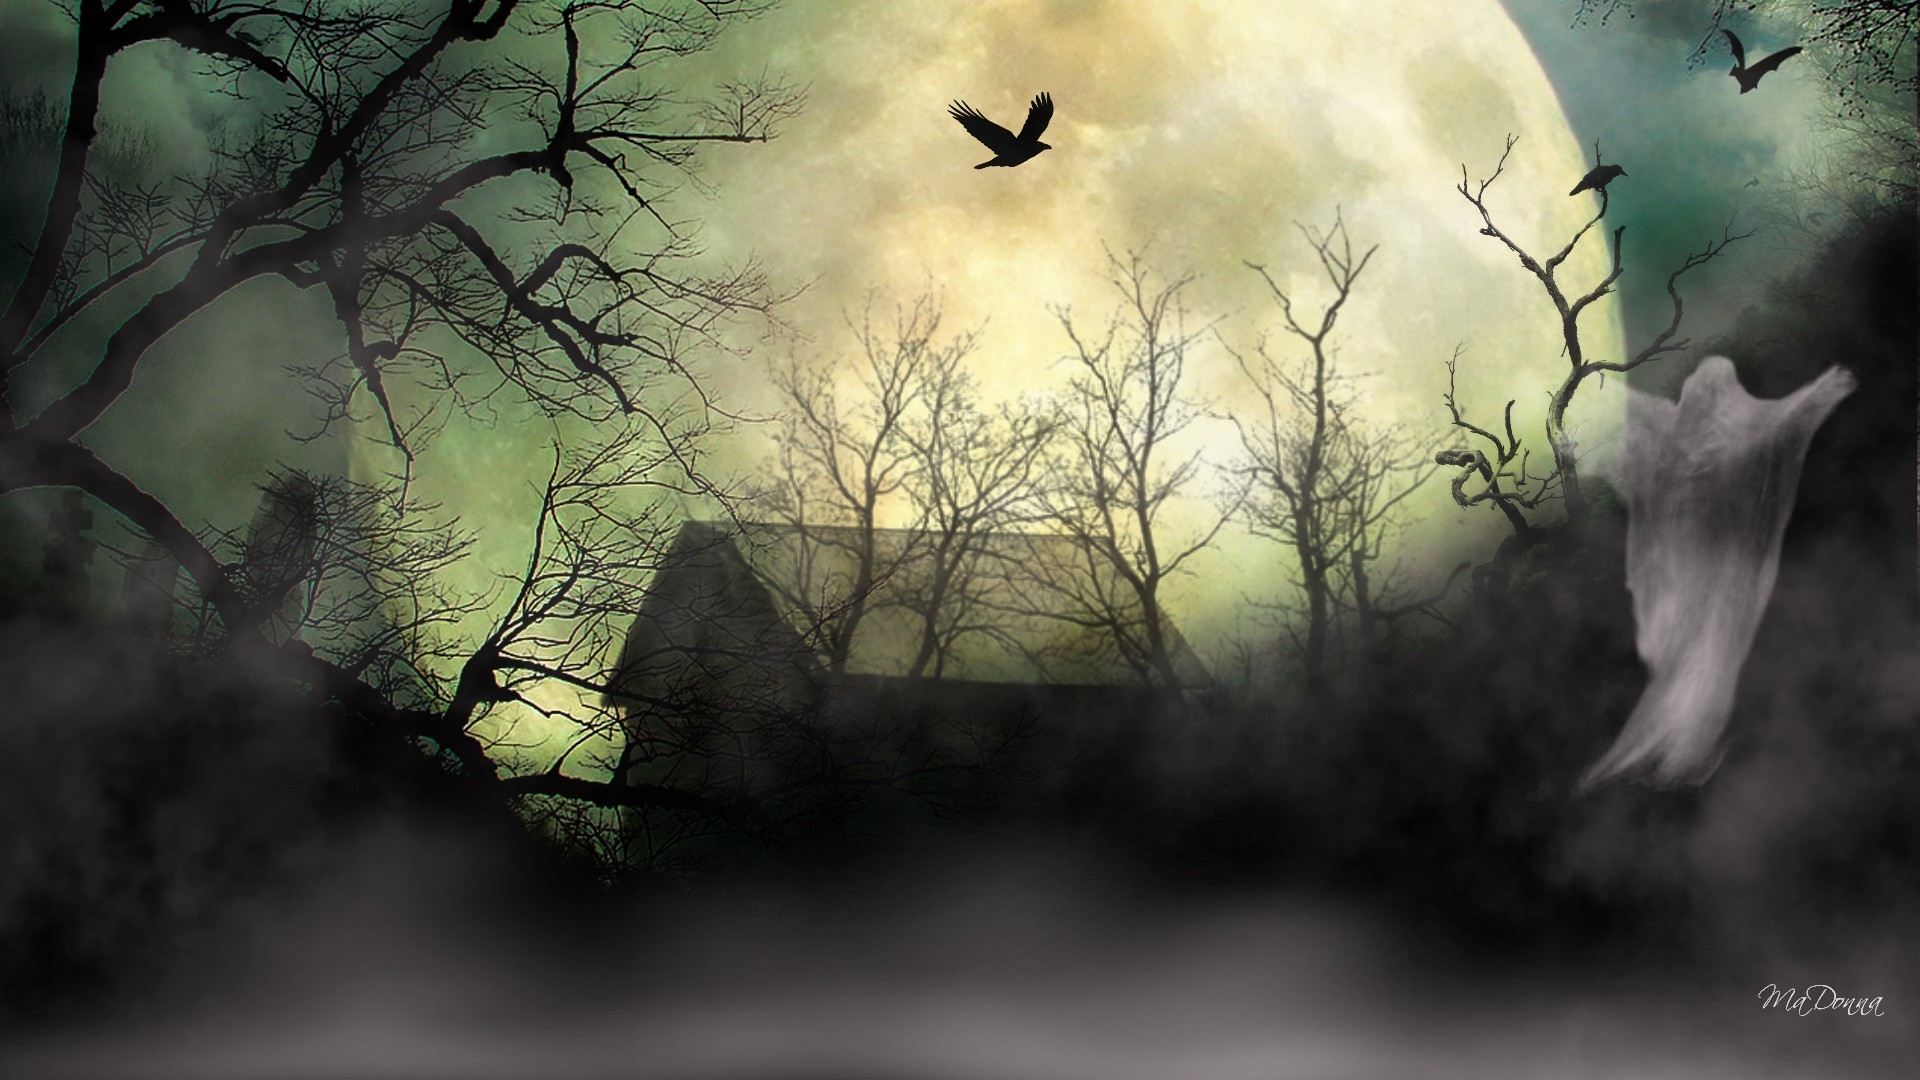 Ghoulish Tag – Dreadful Mist Spooky Weird Halloween Uncommon Trees Full Barn Quaint Enigmatic Fearsome Horrible